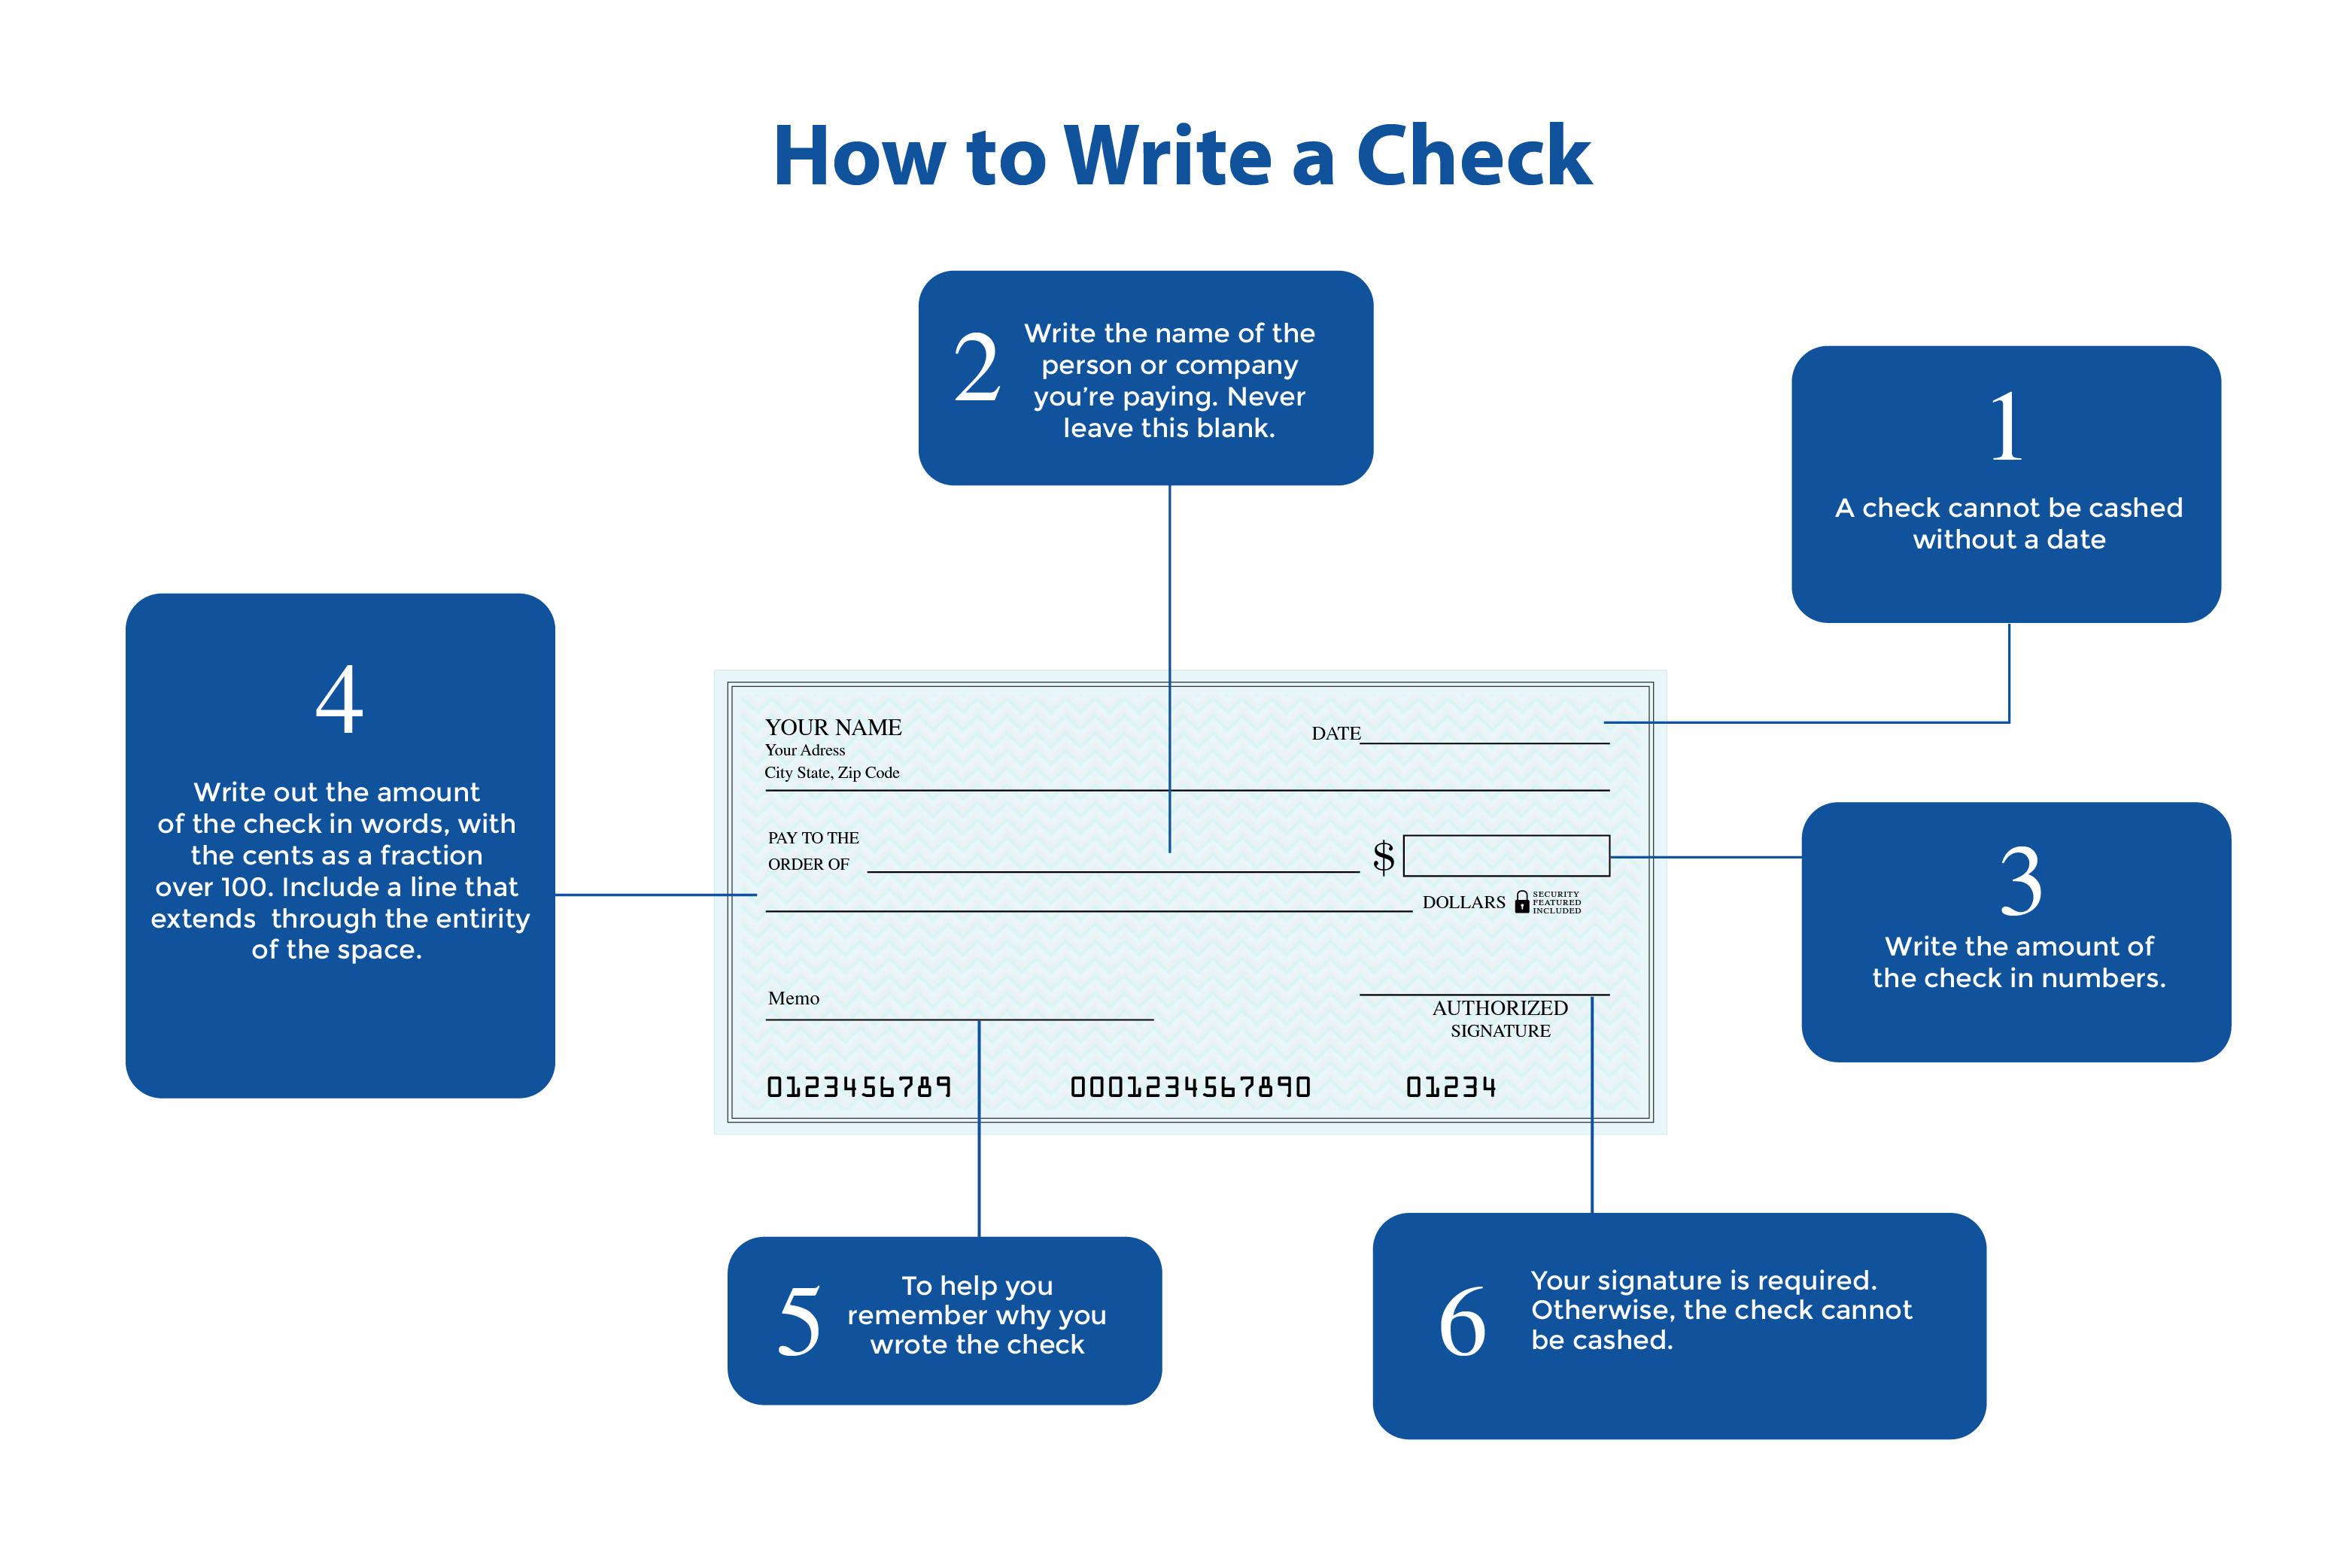 Image of a check with diagram on how to fill out: 1. A check cannot be cashed without a date 2. Write the name of the person or company you are paying 3. Write the amount in numbers 4. Write the amount in words with cents as a fraction over 100. Include a line that extends through the entirety of the space. 5. Memo space to help you remember why you wrote the check. 6. Signature is required or check cannot be cashed. 